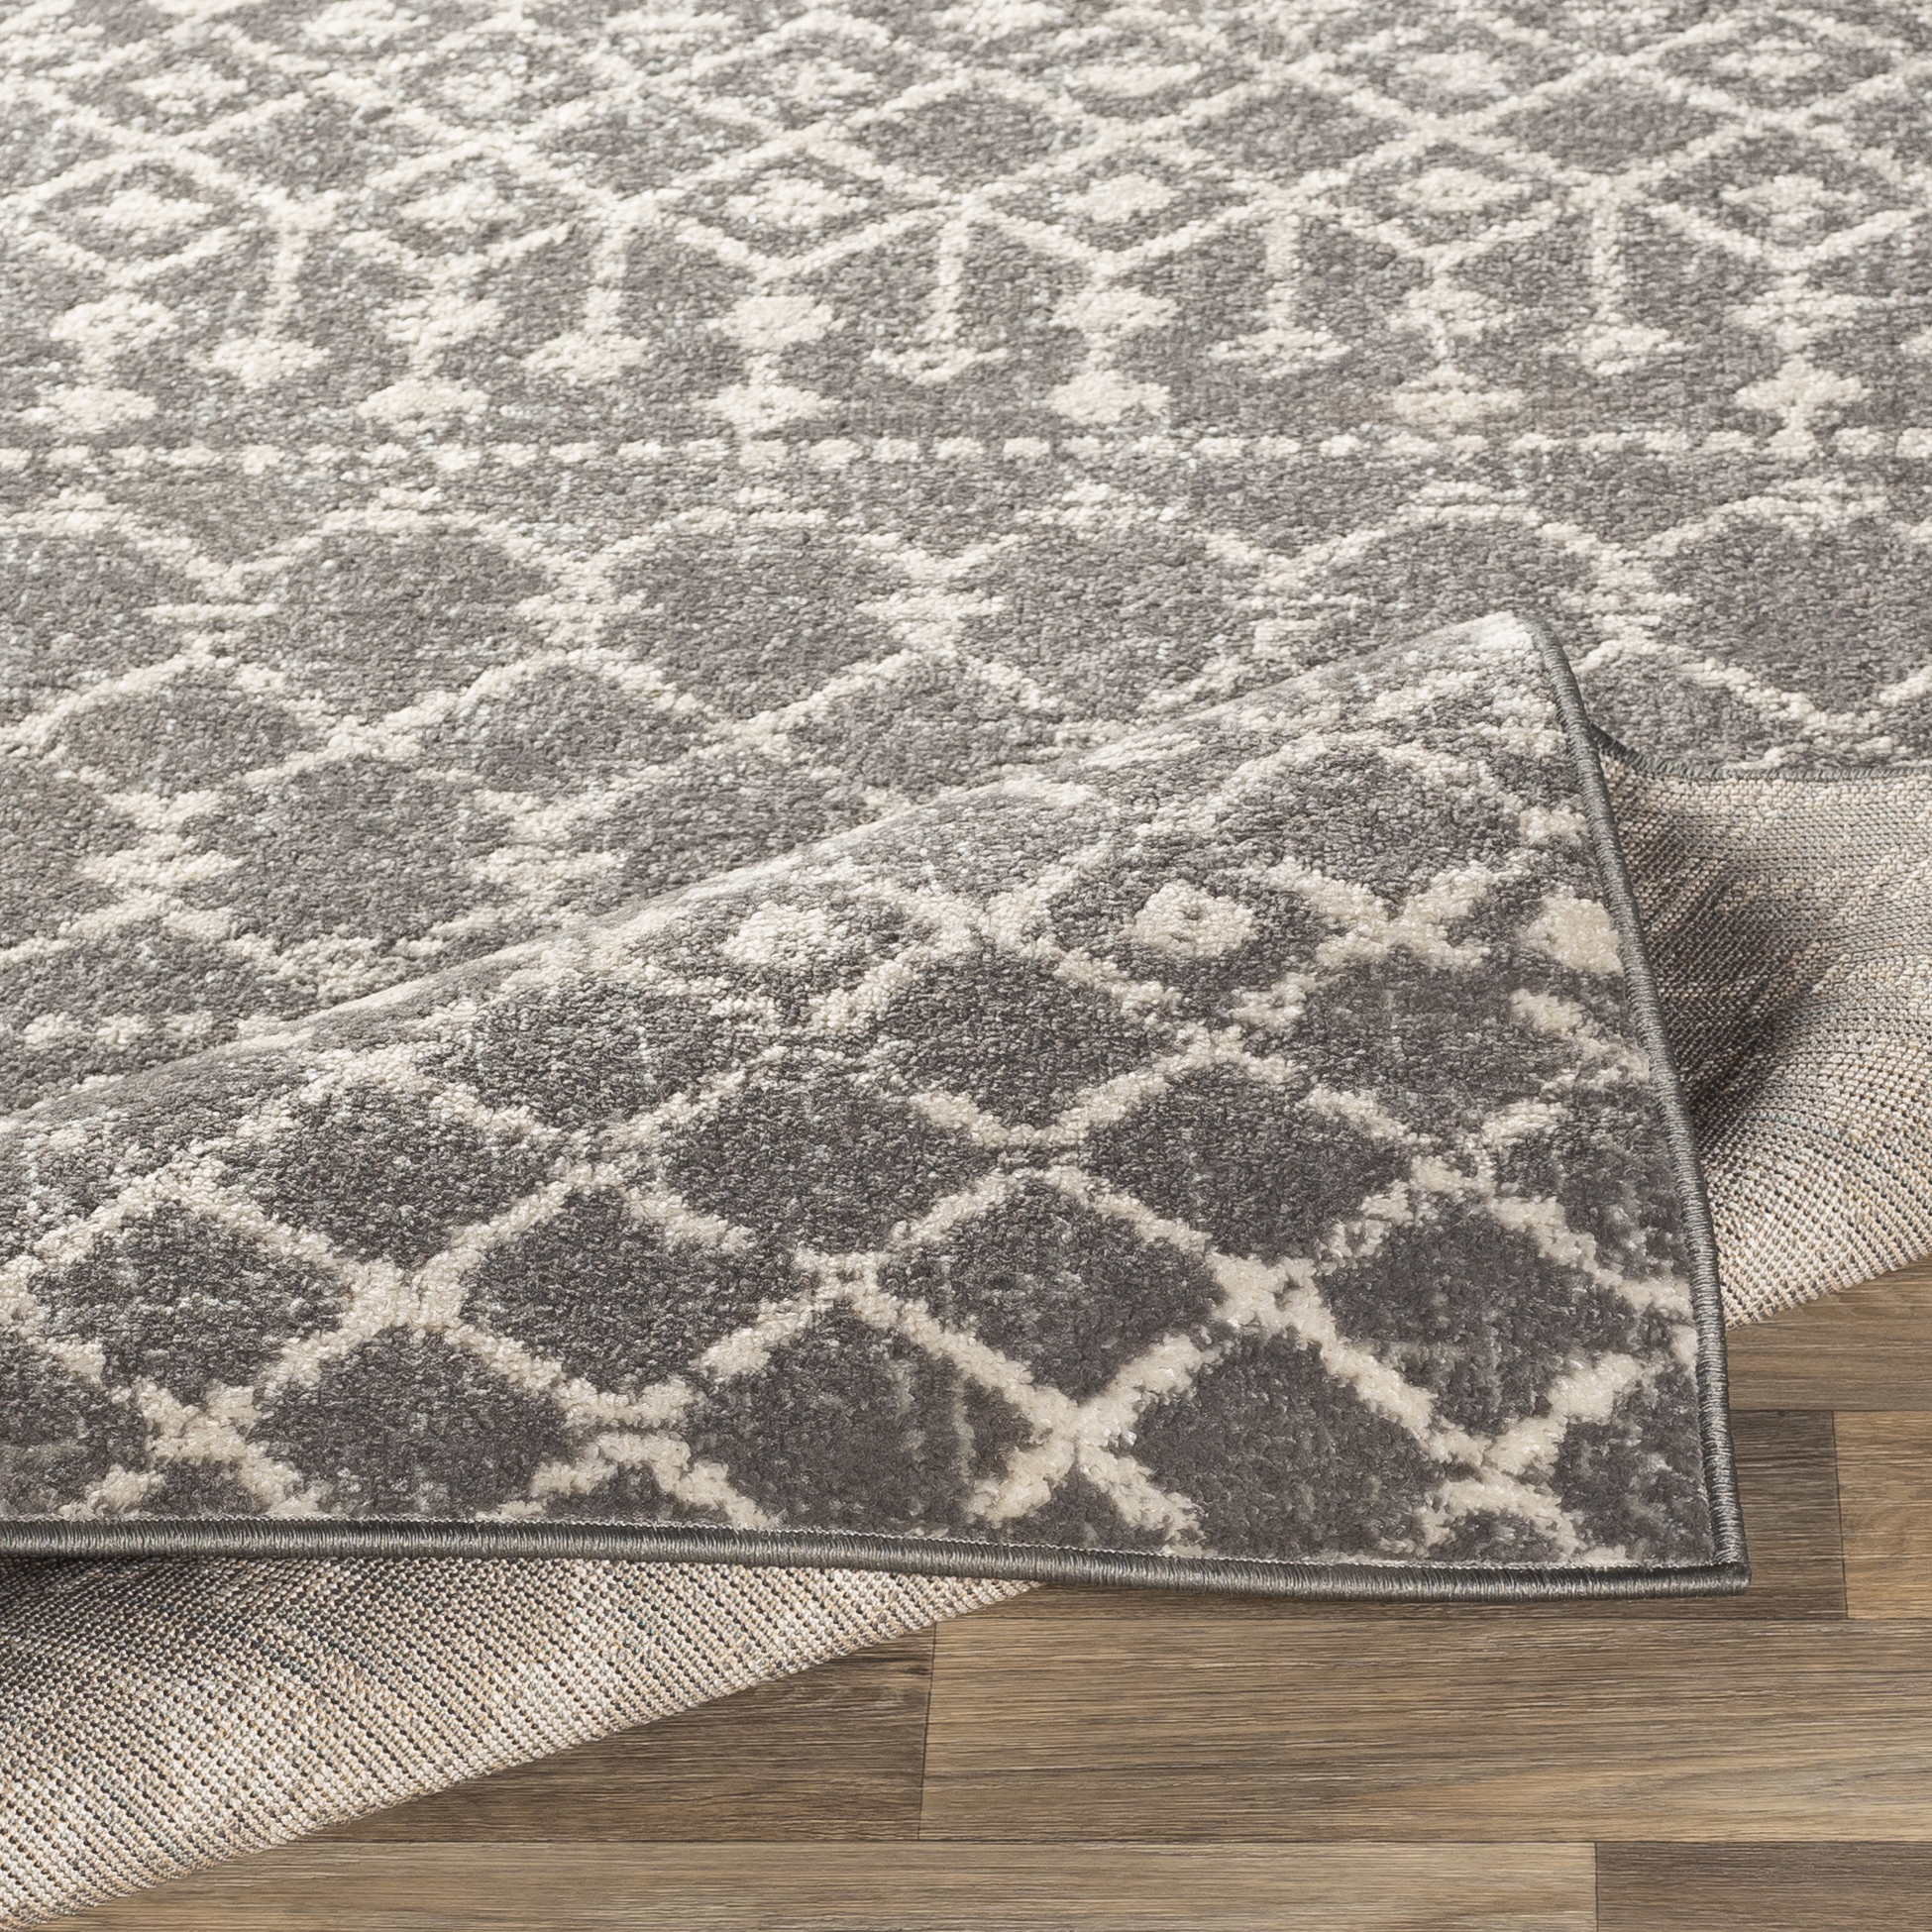 Chester Rug, 7'10" x 10'3" - Image 4